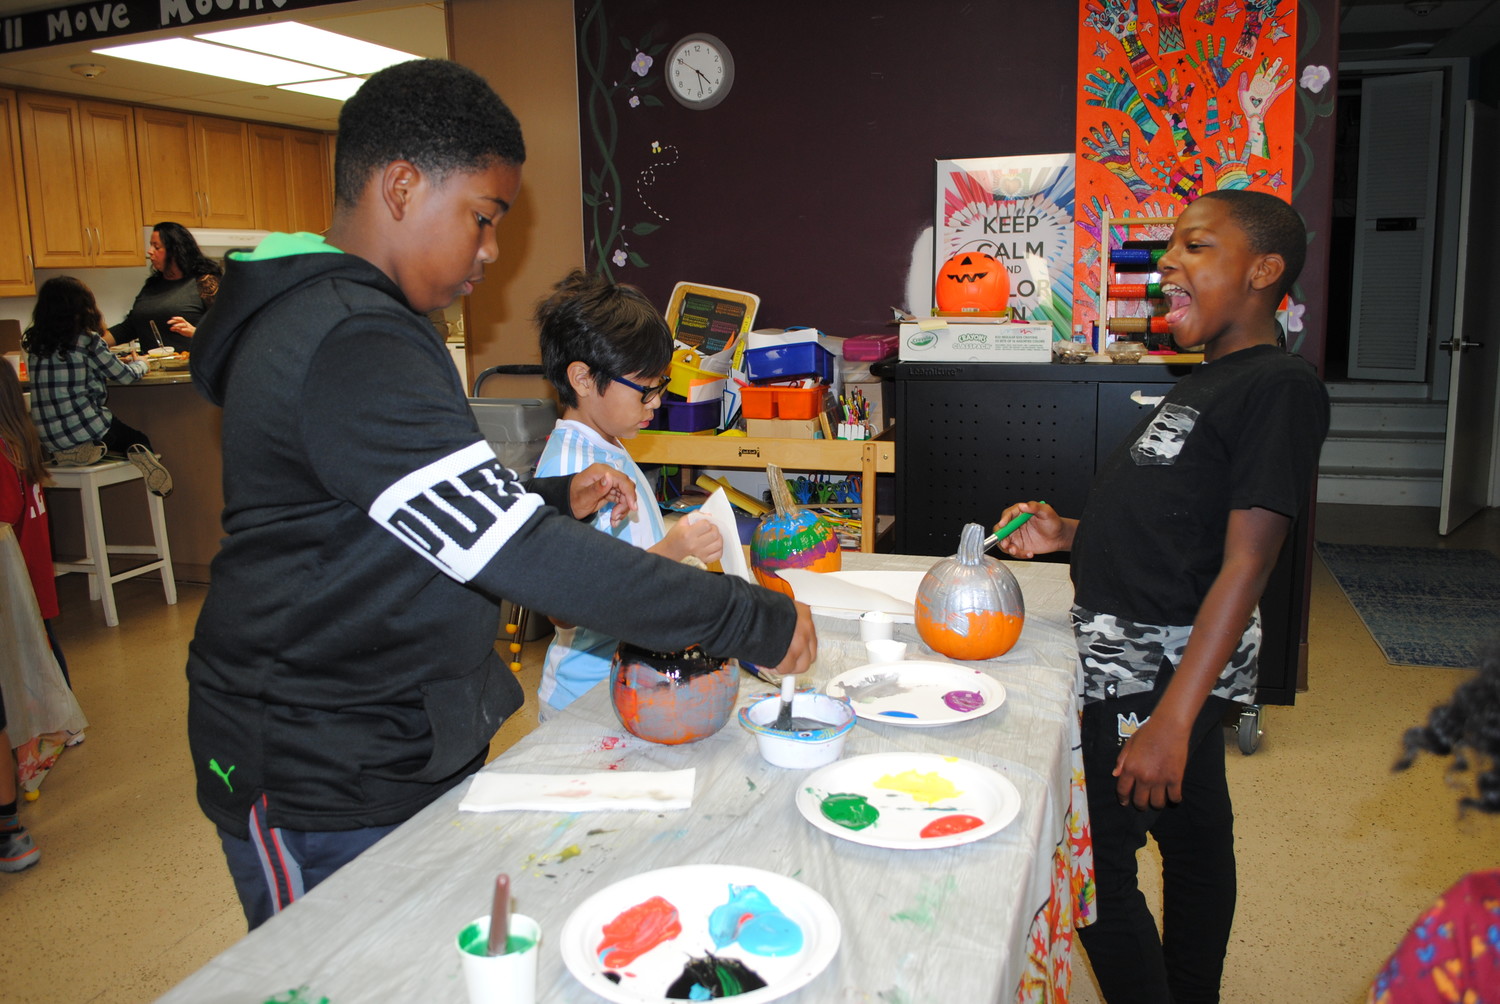 Chris Diggs, 10, Derek Polo, 7, and Derrick Brown, 10, decorated pumpkins at the Youth Bureau’s Lights on Afterschool event.